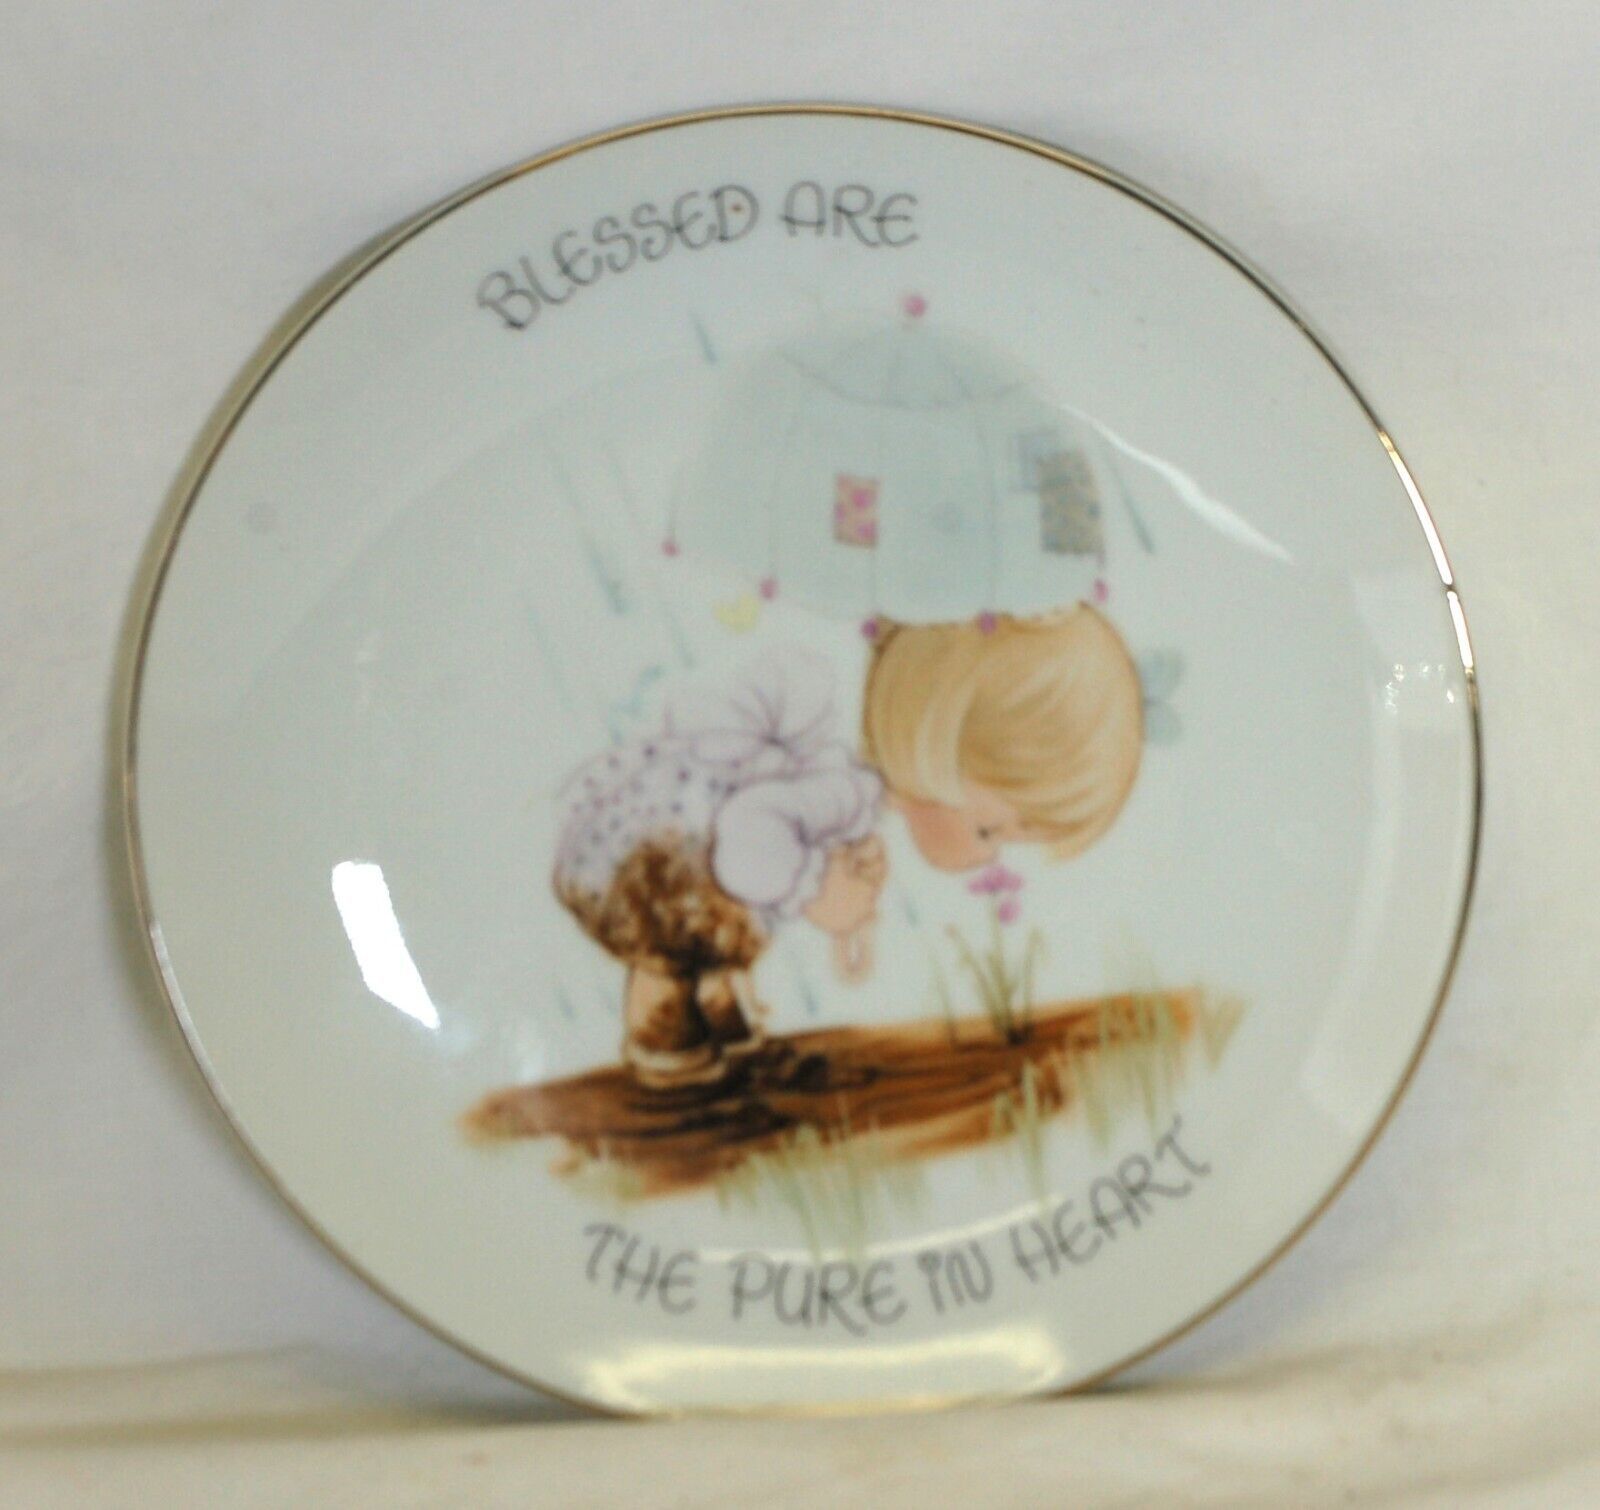 Precious Moments Enesco Collectors Plate Blessed Are Pure in Heart 1984 Japan - $12.86